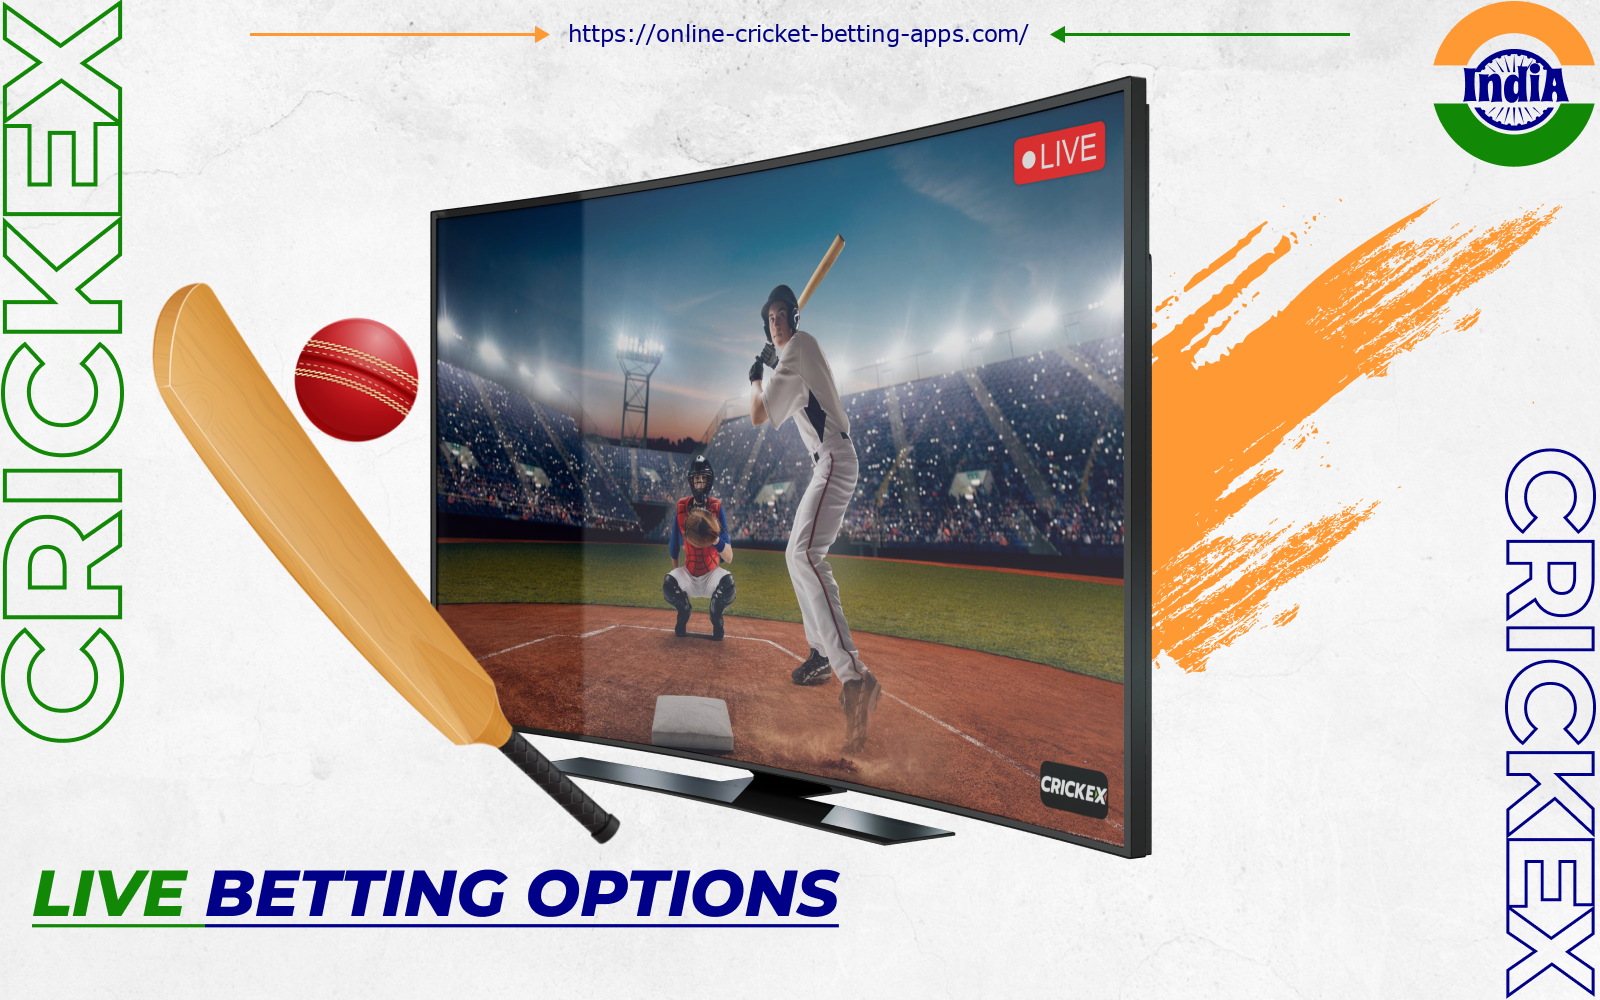 Crickex has added a wide range of options for Indian bettors who like to engage in live betting